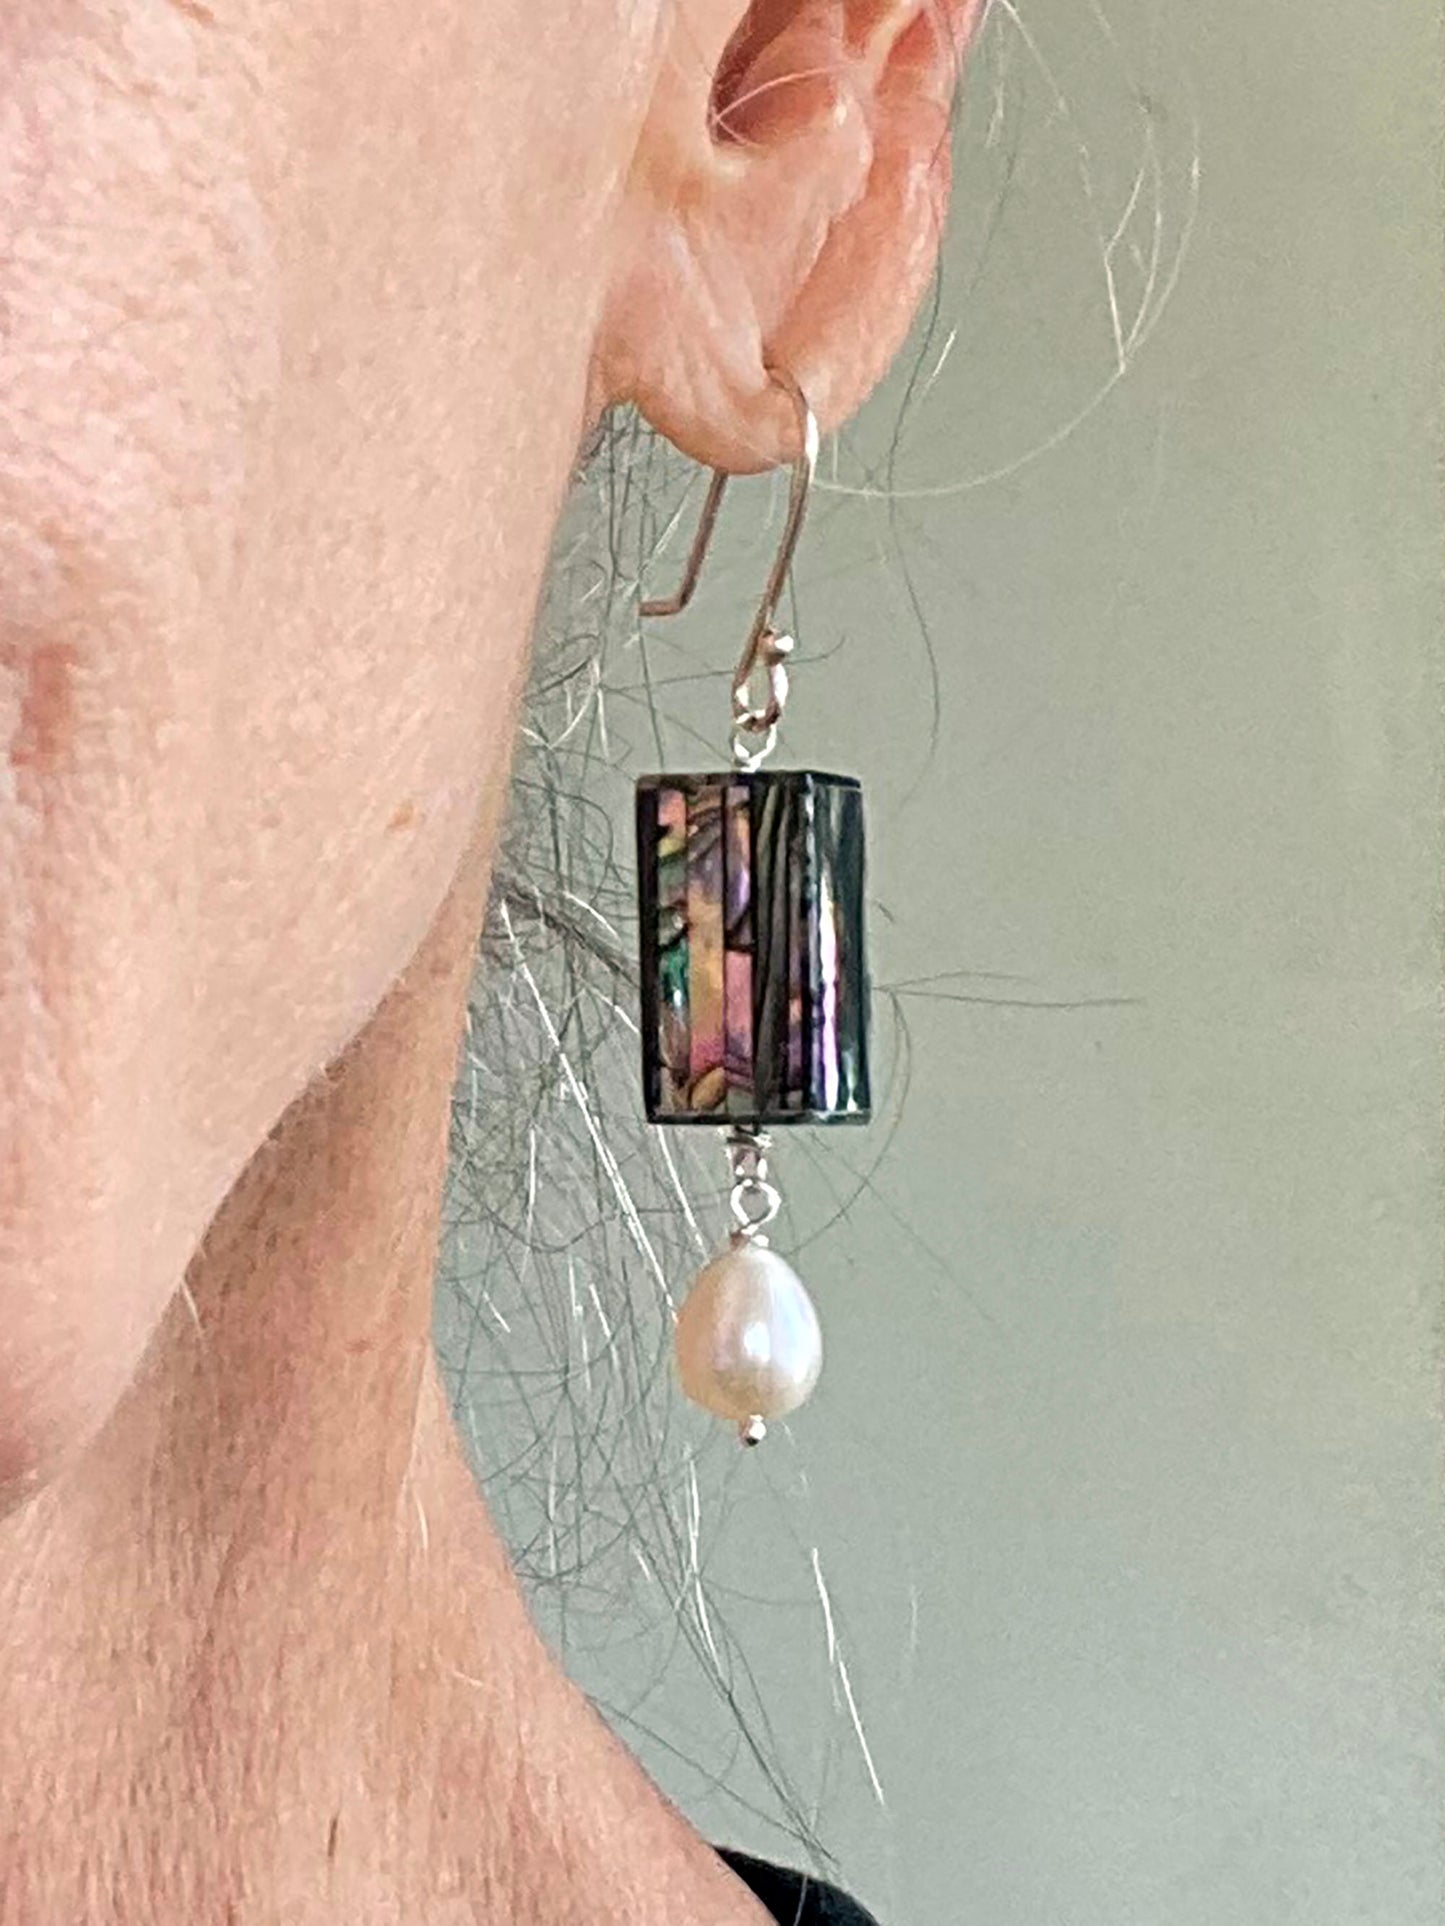 Rectangular Abalone Inlay Earrings with White Pearl Drop on Sterling Silver Wires by Linda Queally